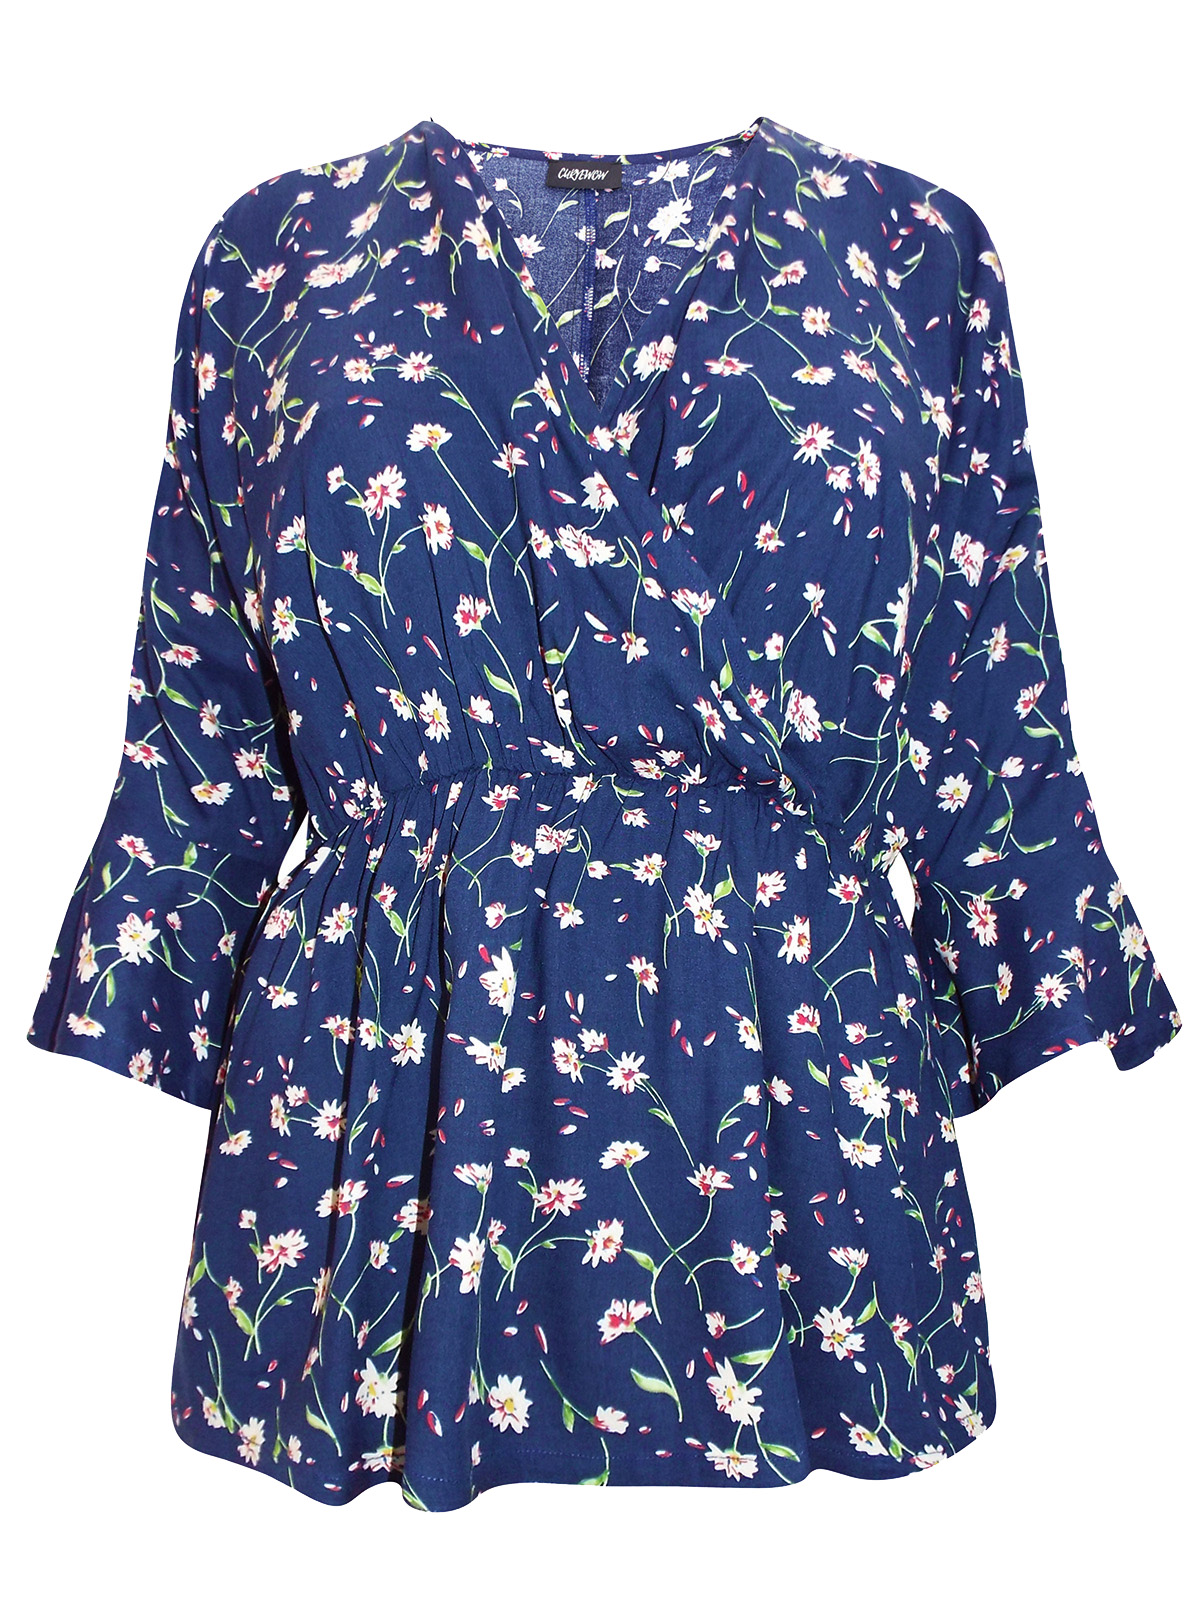 Curvewow - - Curvewow NAVY Floral Print Frill Wrap Top - Plus Size 16 ...